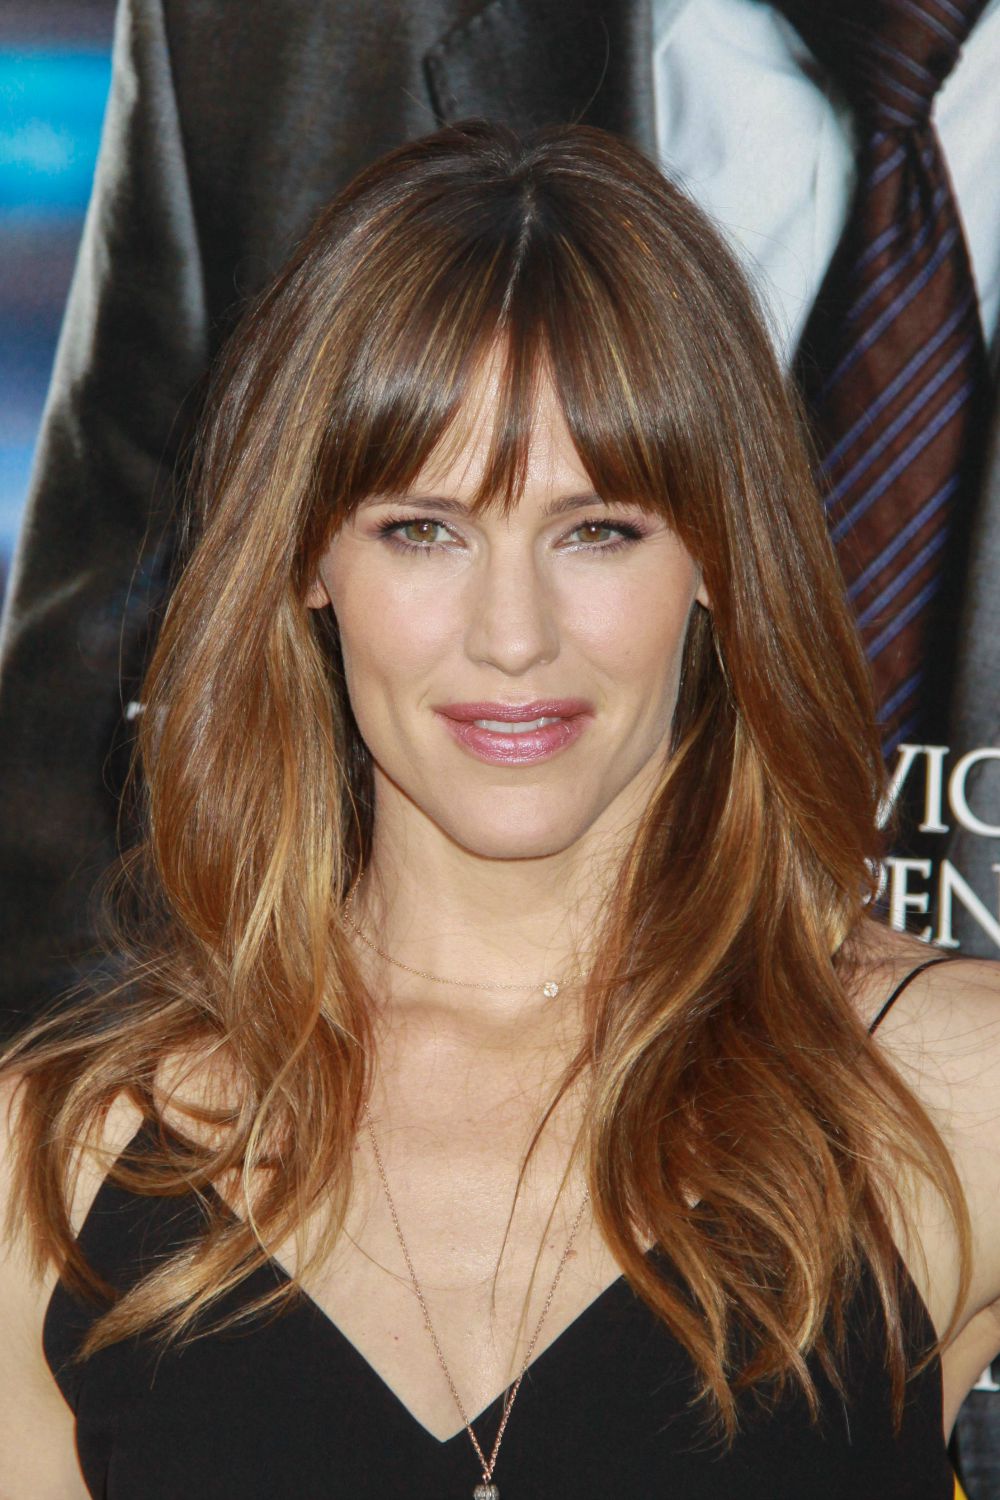 Change Up Your Look with These 15 Hairstyle Ideas with Bangs